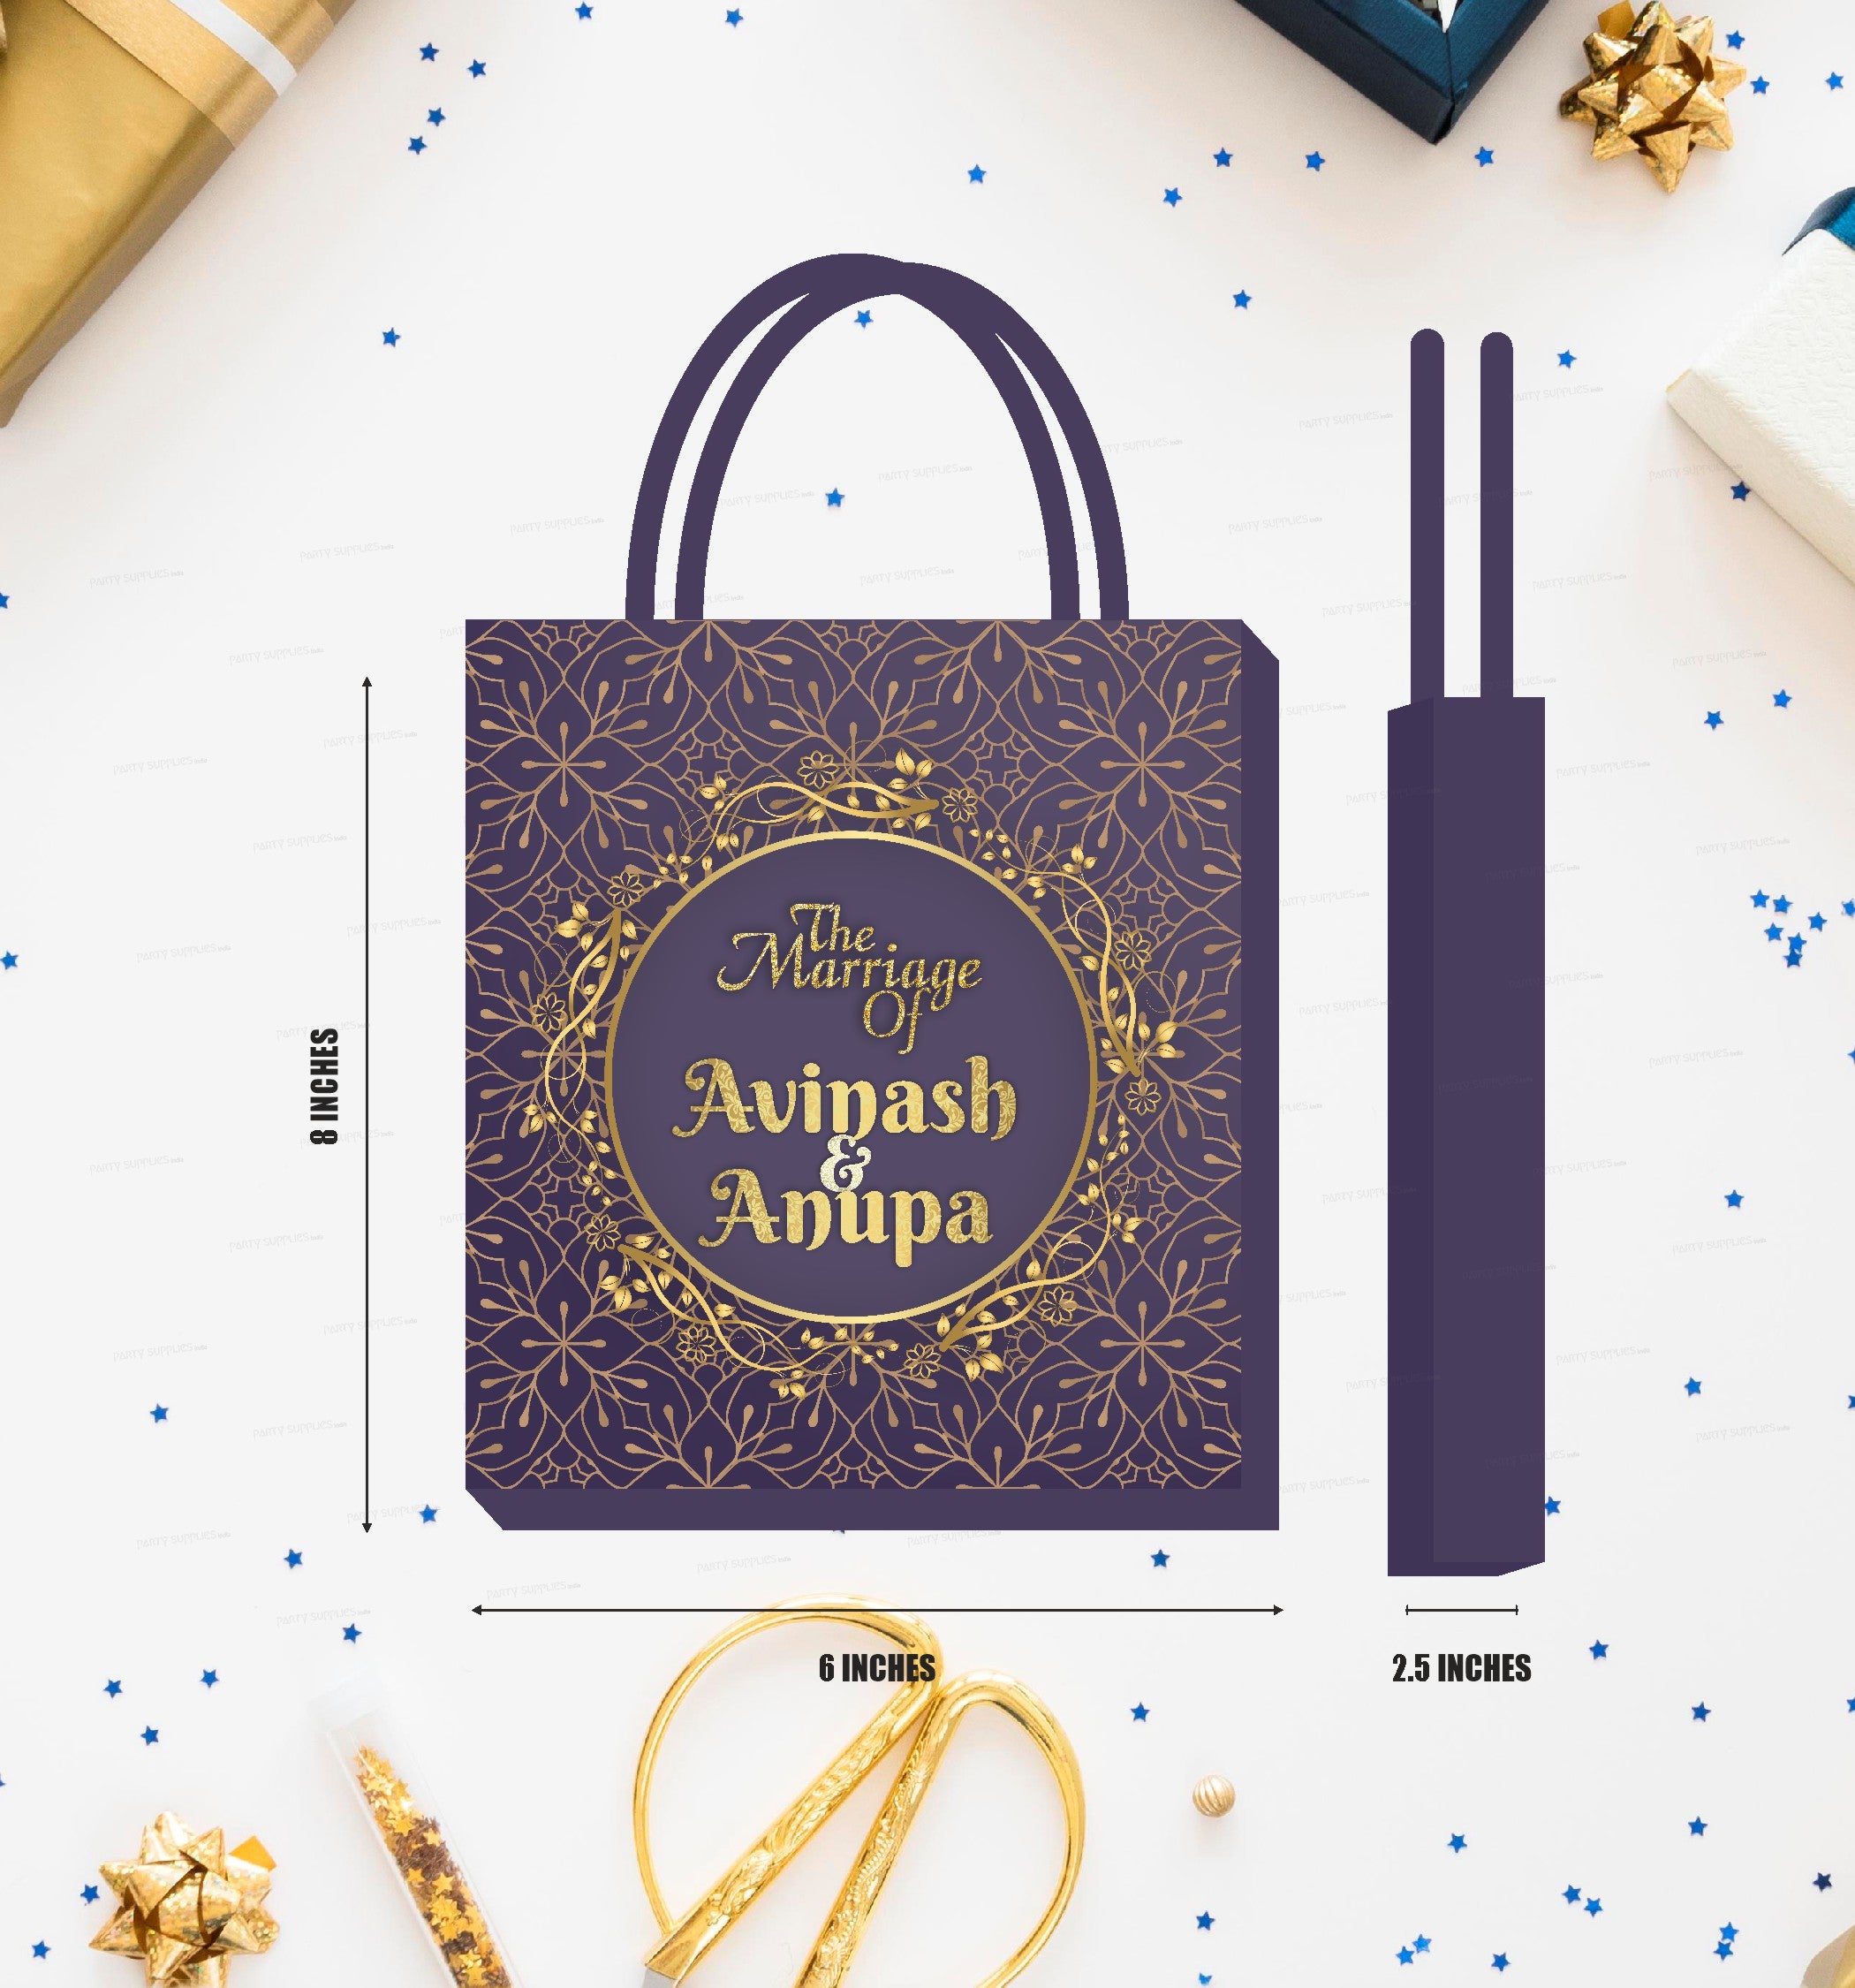 Wedding Gift Bag In Madurai - Prices, Manufacturers & Suppliers